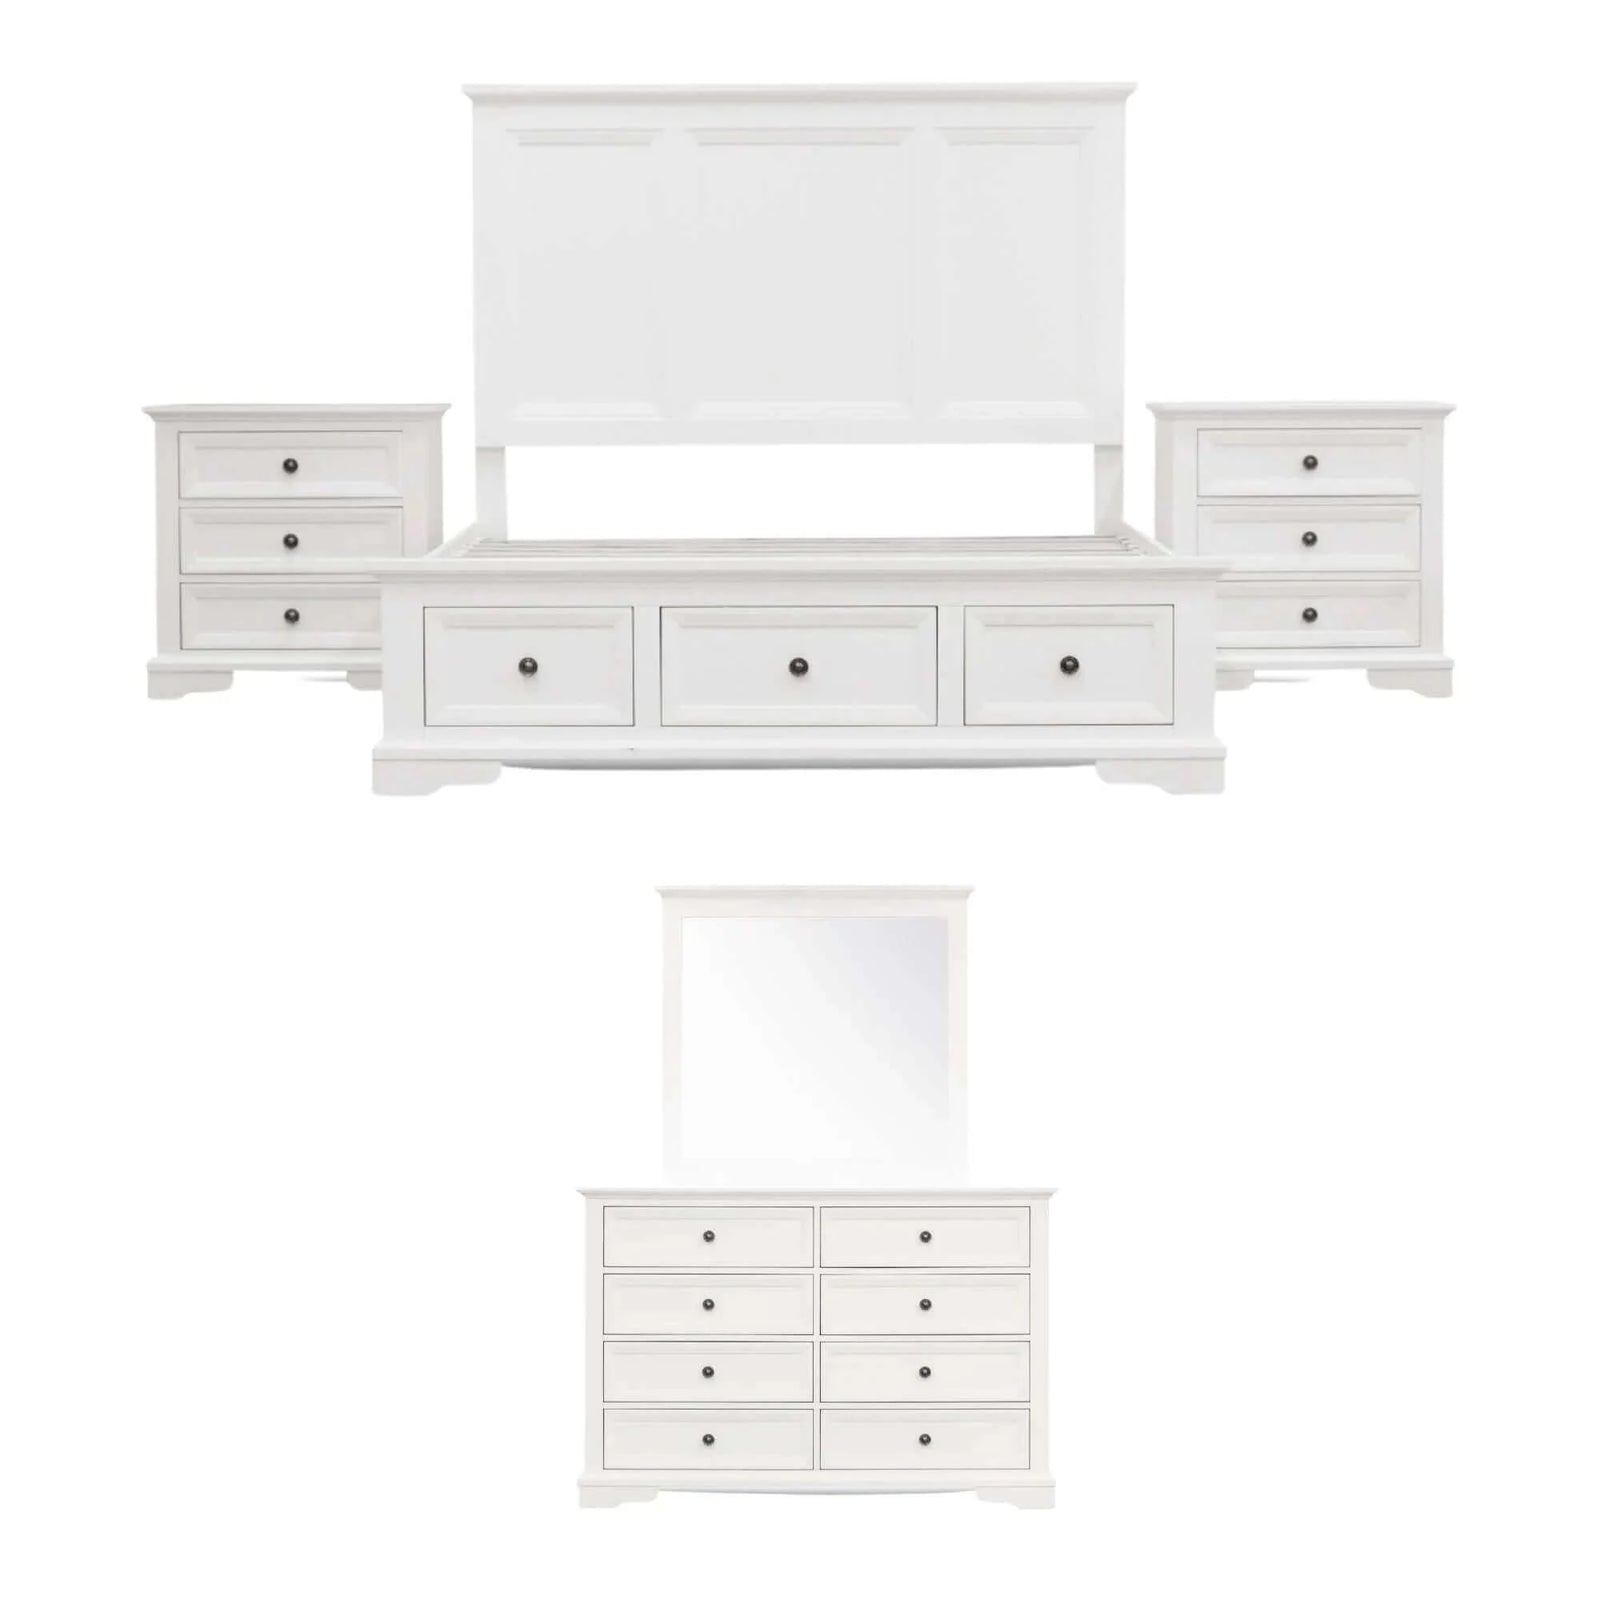 Buy celosia 5pc queen bed frame bedroom suite bedside dresser mirror package - white - upinteriors-Upinteriors